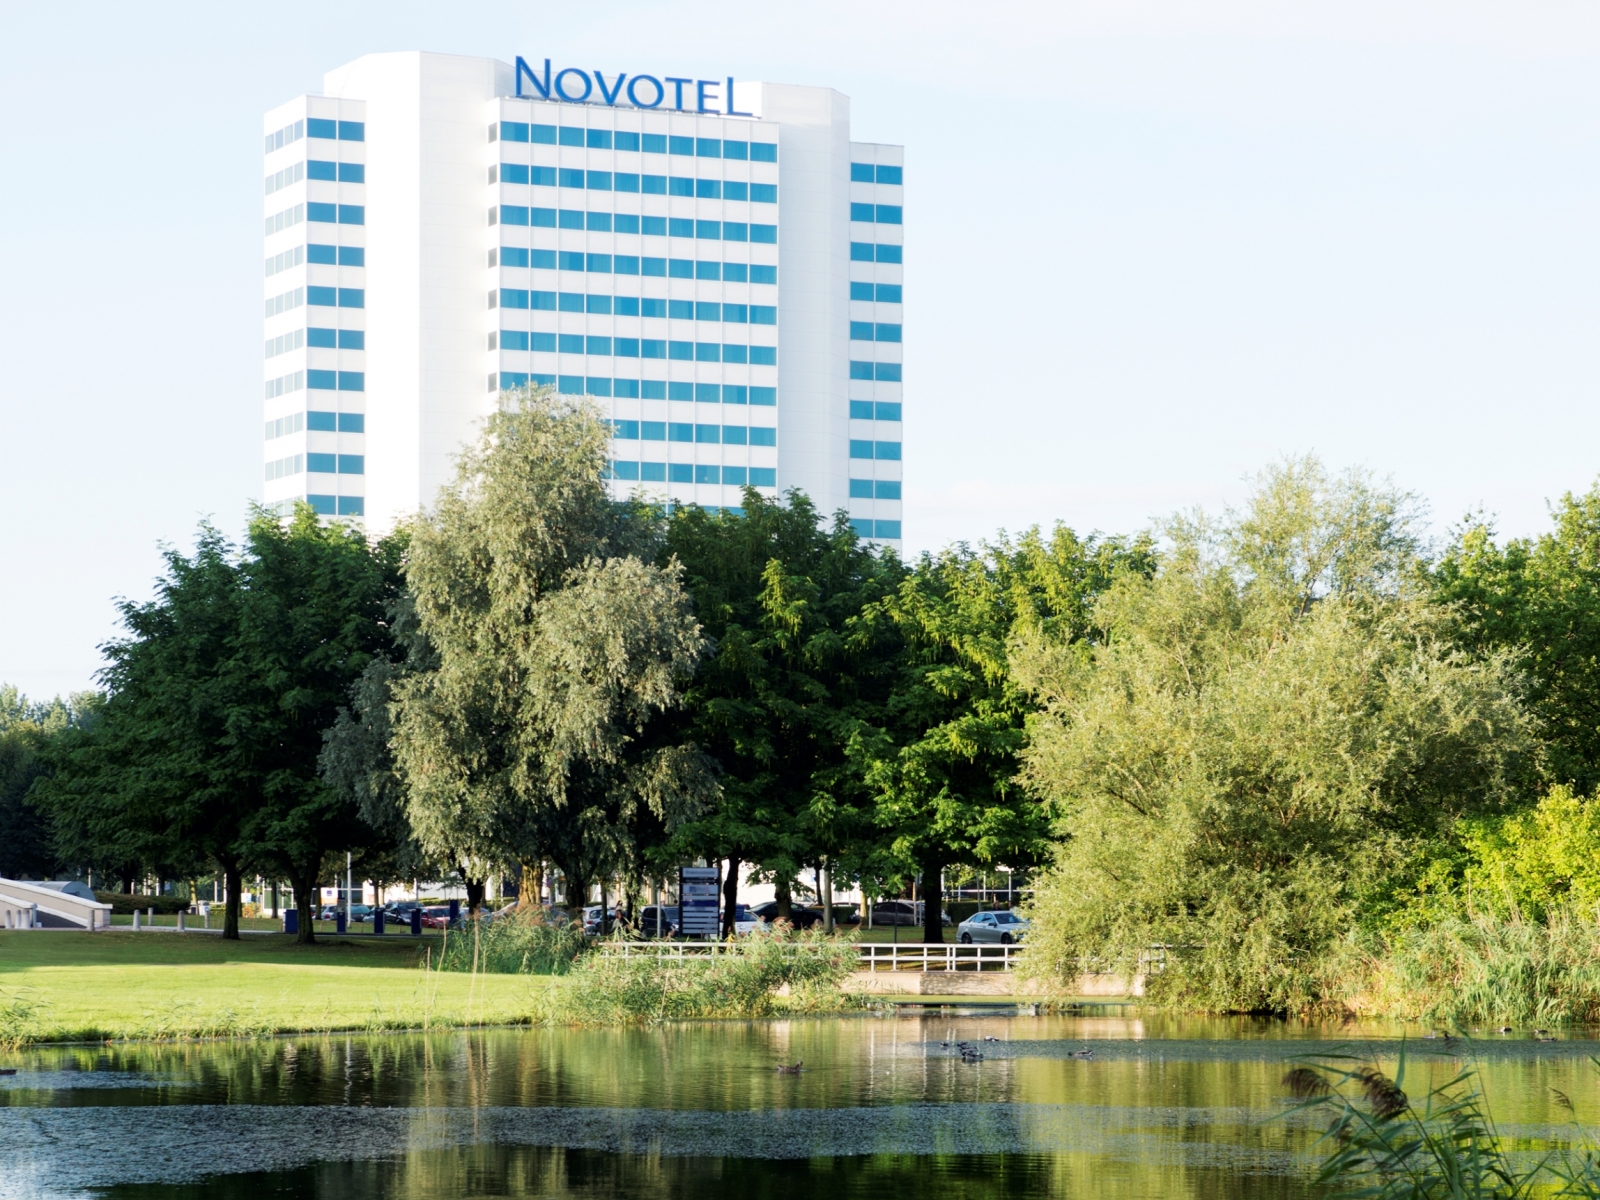 Novotel Rotterdam Brainpark <br/>83.70 ew <br/> <a href='http://vakantieoplossing.nl/outpage/?id=dc9f8d7be51771cbeff86aa53457c6bf' target='_blank'>View Details</a>